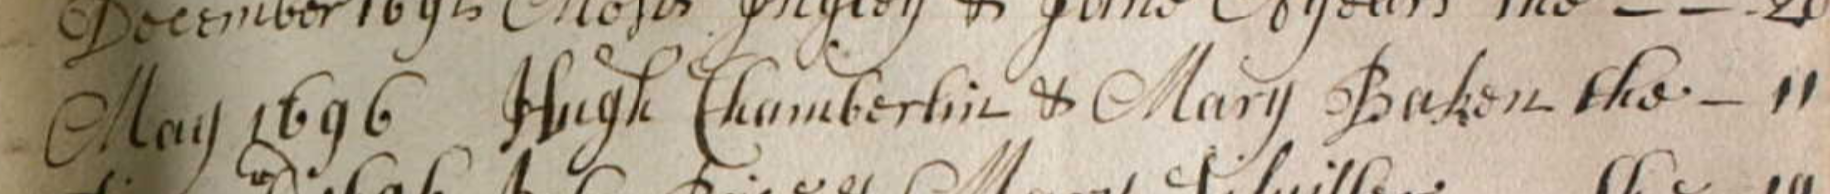 Figure 5: Marriage Register entry for Hugh Chamberlen the younger and Mary Bacon